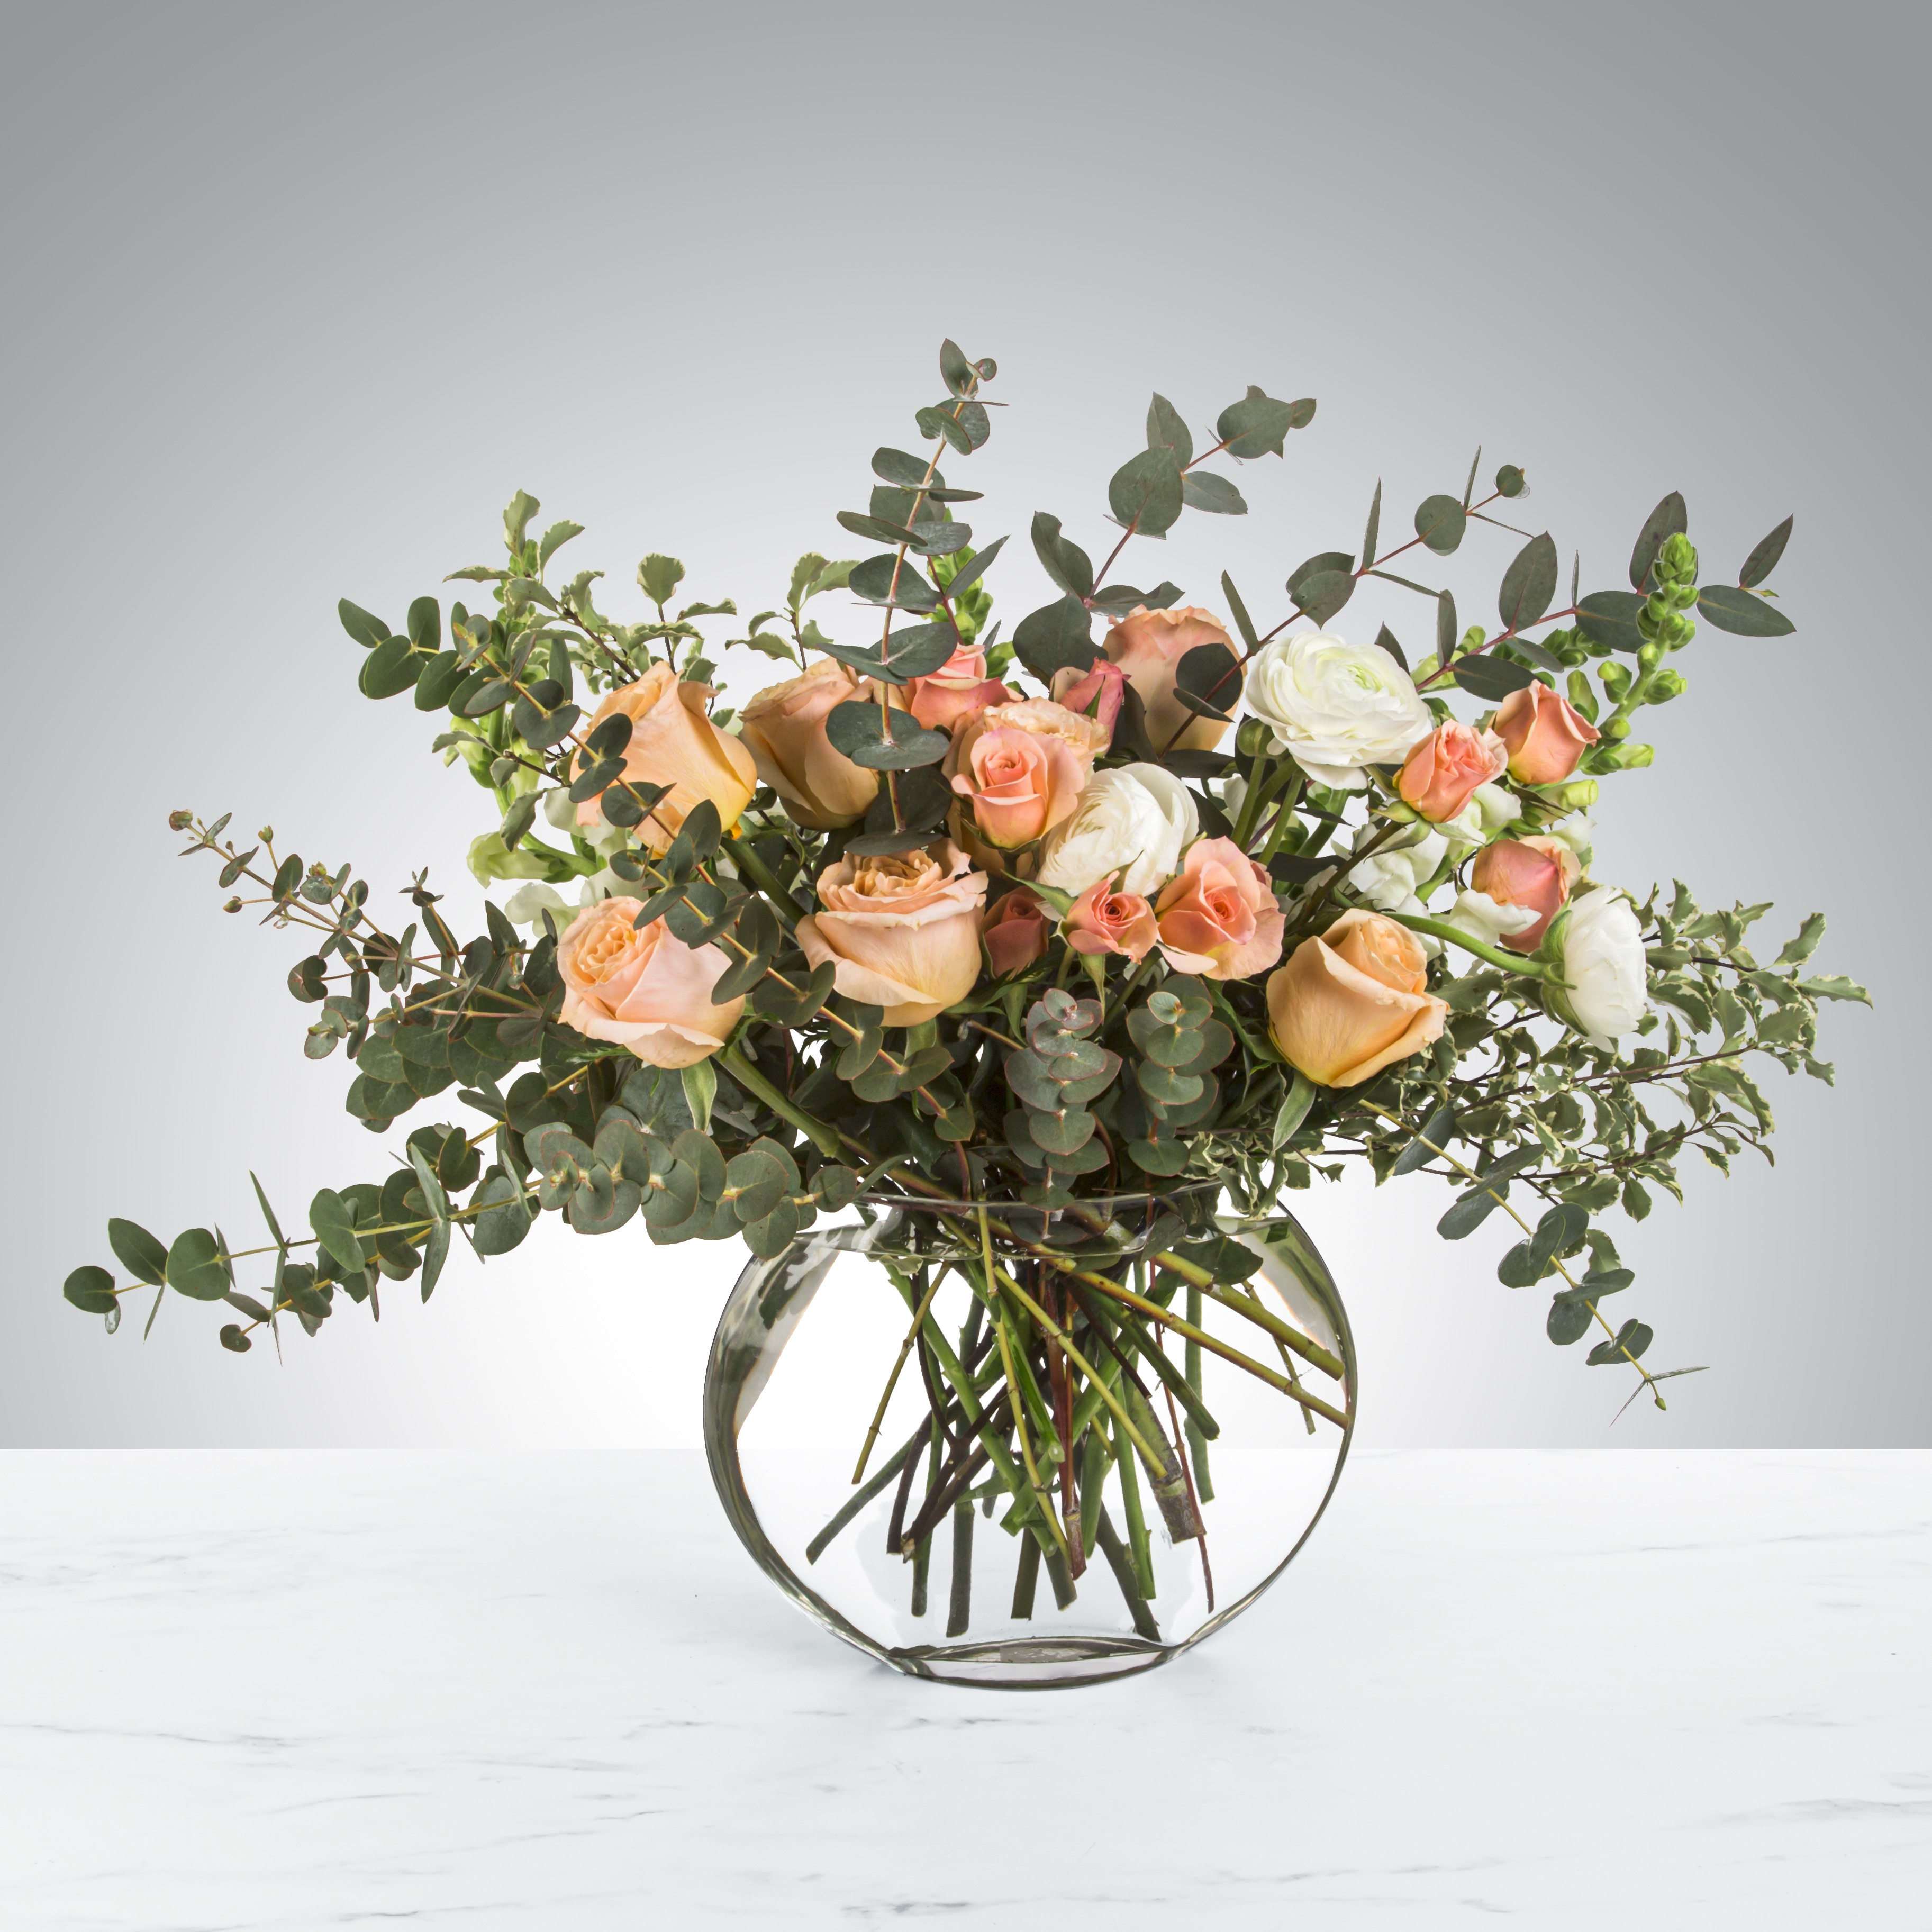 Southern Sugar  - Sugar by BloomNation™ is the most whimsical way to sweeten somebody's day. This beautiful boho arrangement with eucalyptus, peach roses, and white ranunculus in a moon shaped vase elevates any space. Perfect for Women's Day, Mother's Day, or any birthday.   APPROXIMATE DIMENSIONS: 22&quot; W x 20&quot; H